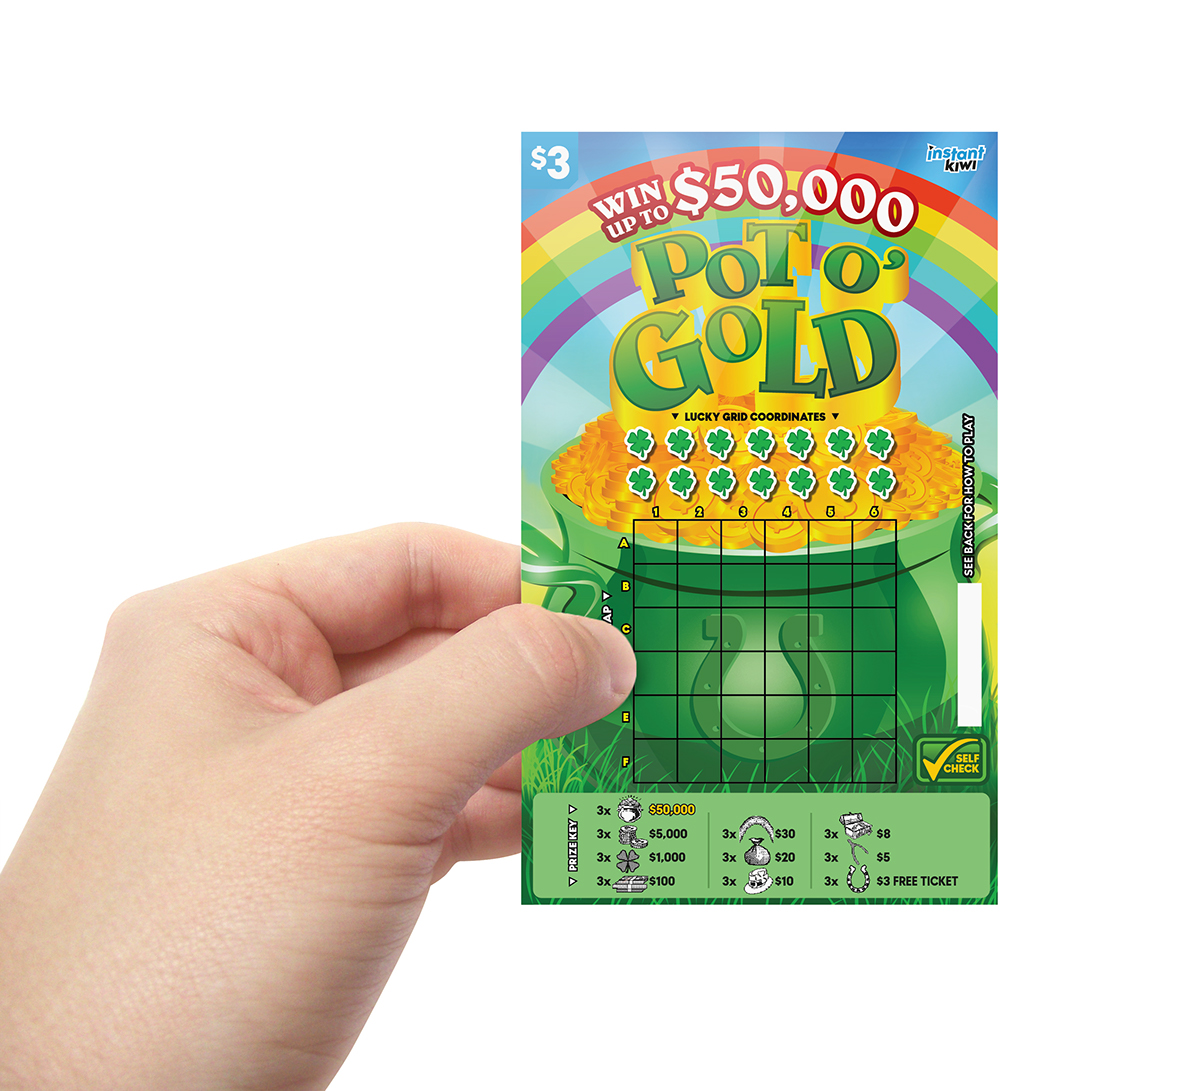 Gaming scratch and win scratch win Games Lottery vector illustrations vibrant Fun bright ticket New Zealand